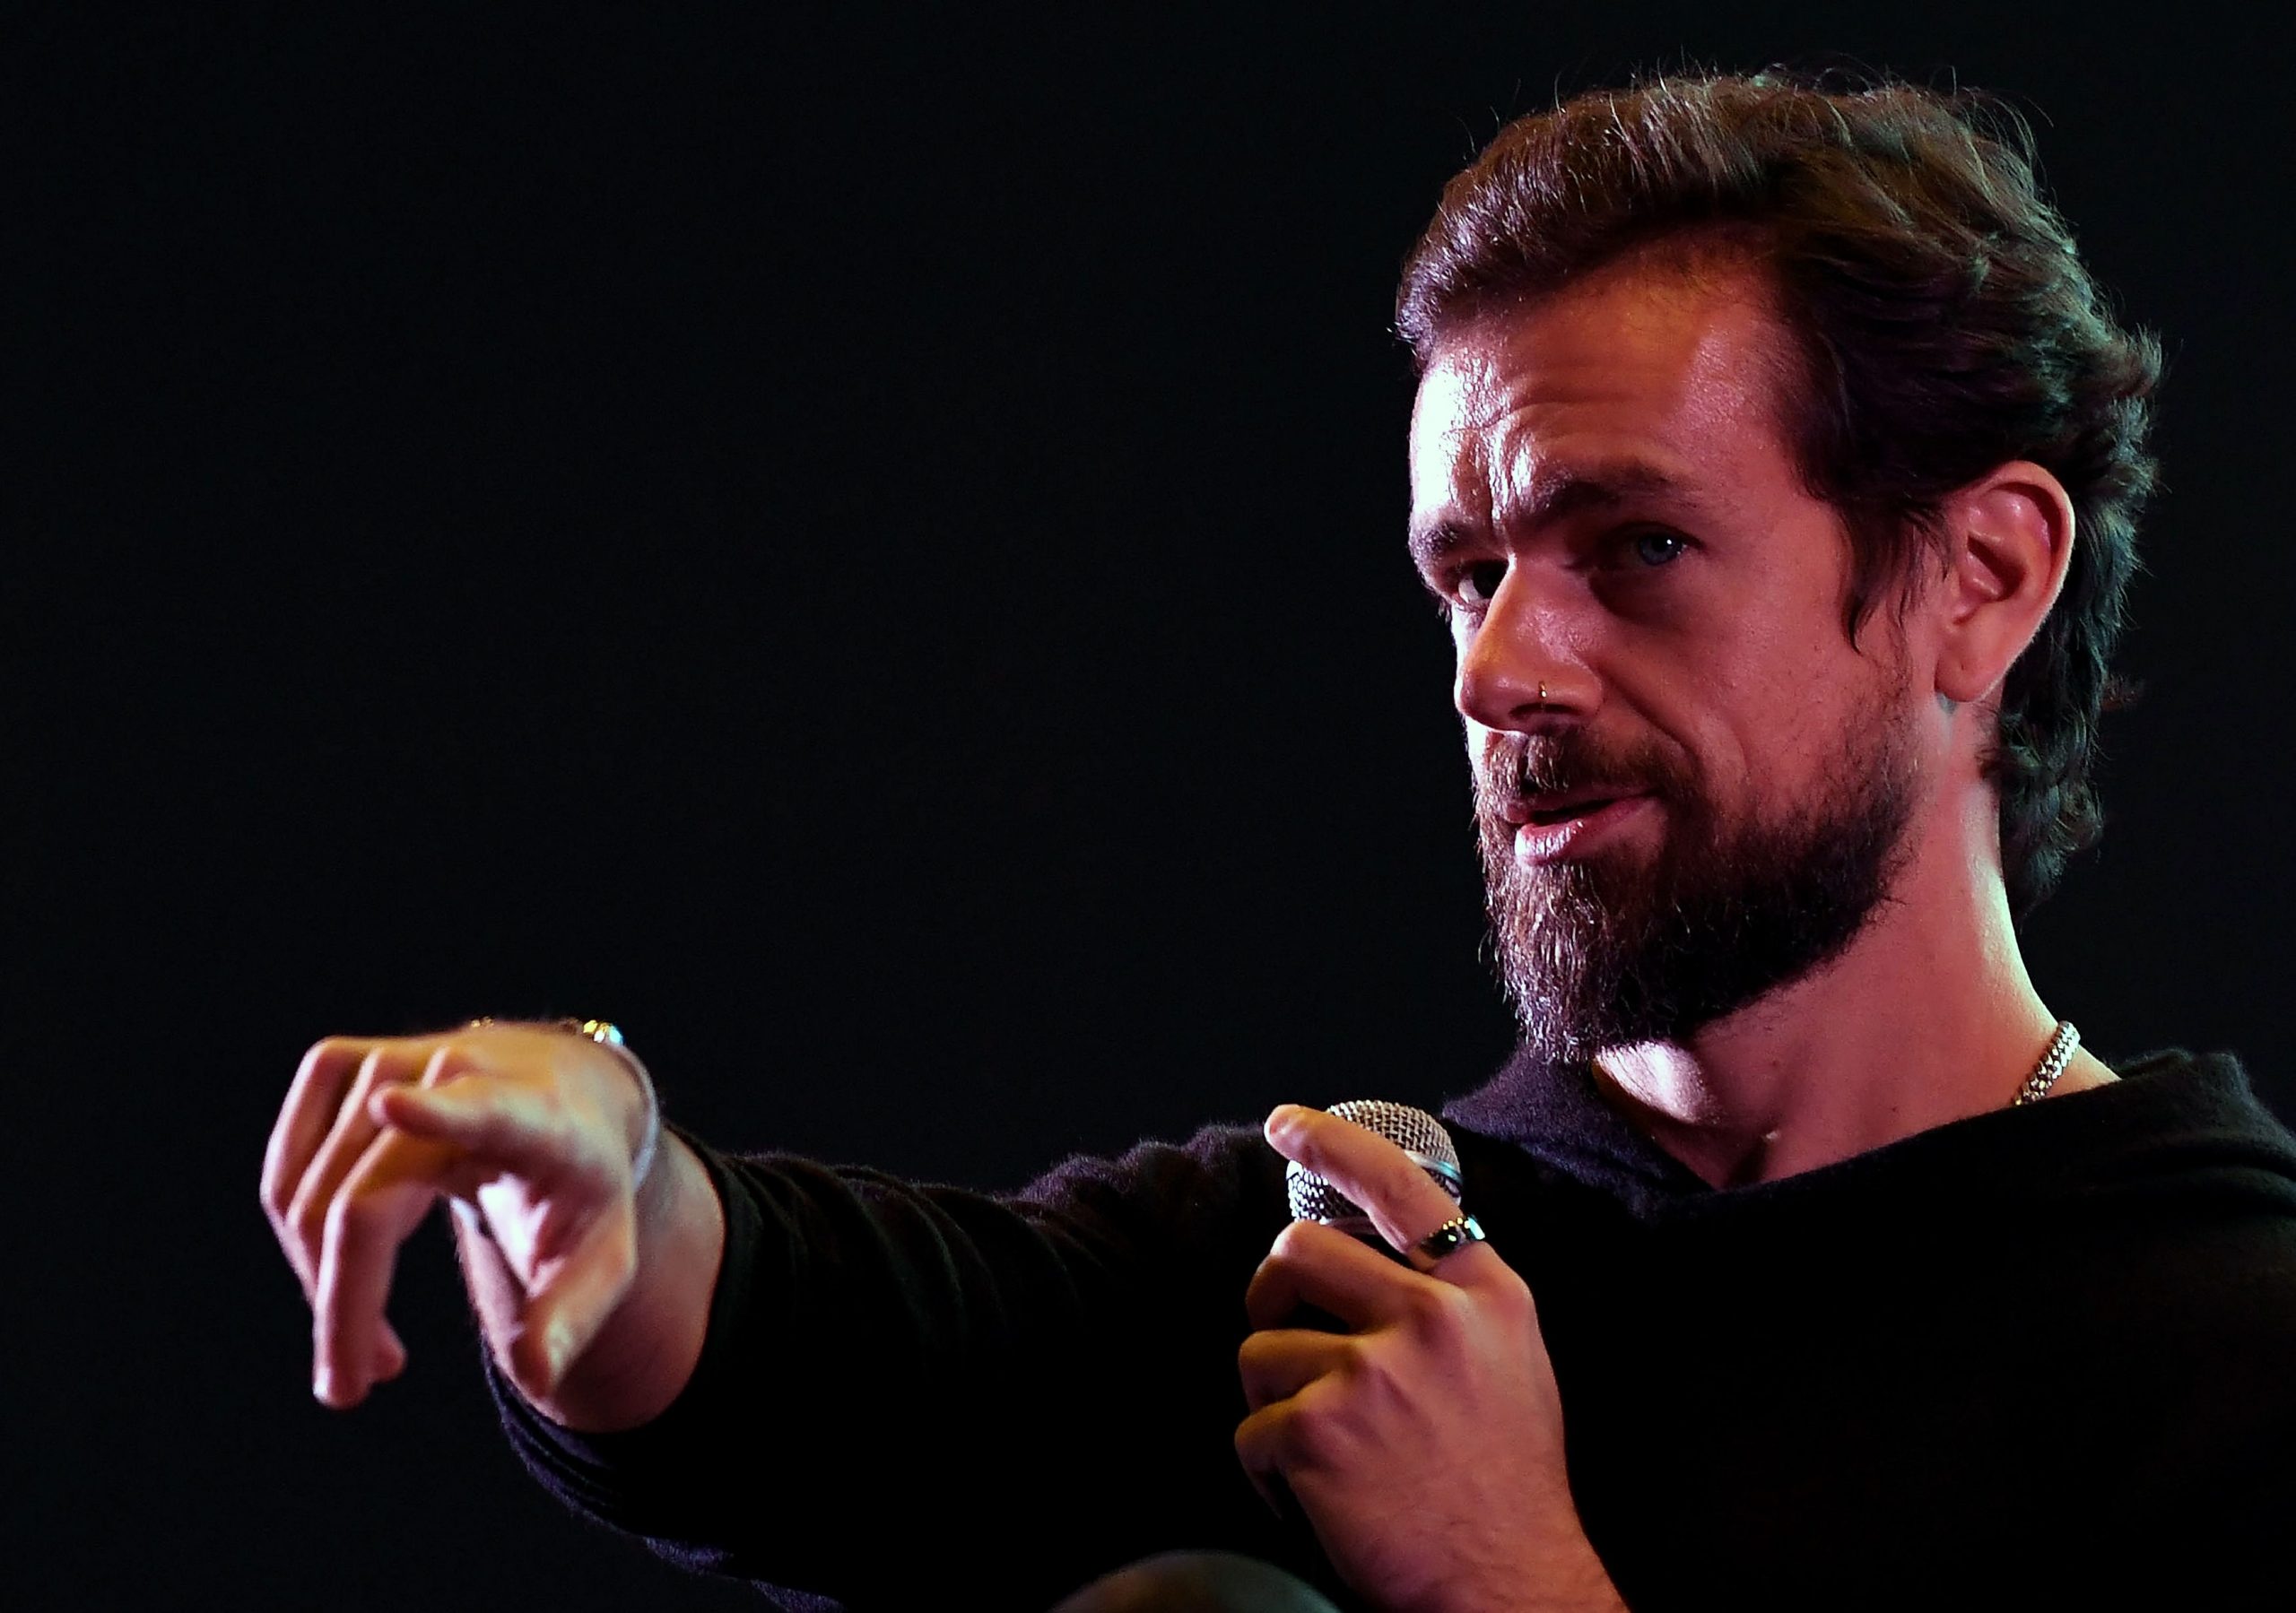 Ex-Twitter CEO Jack Dorsey on Musk takeover: Everything in its right place